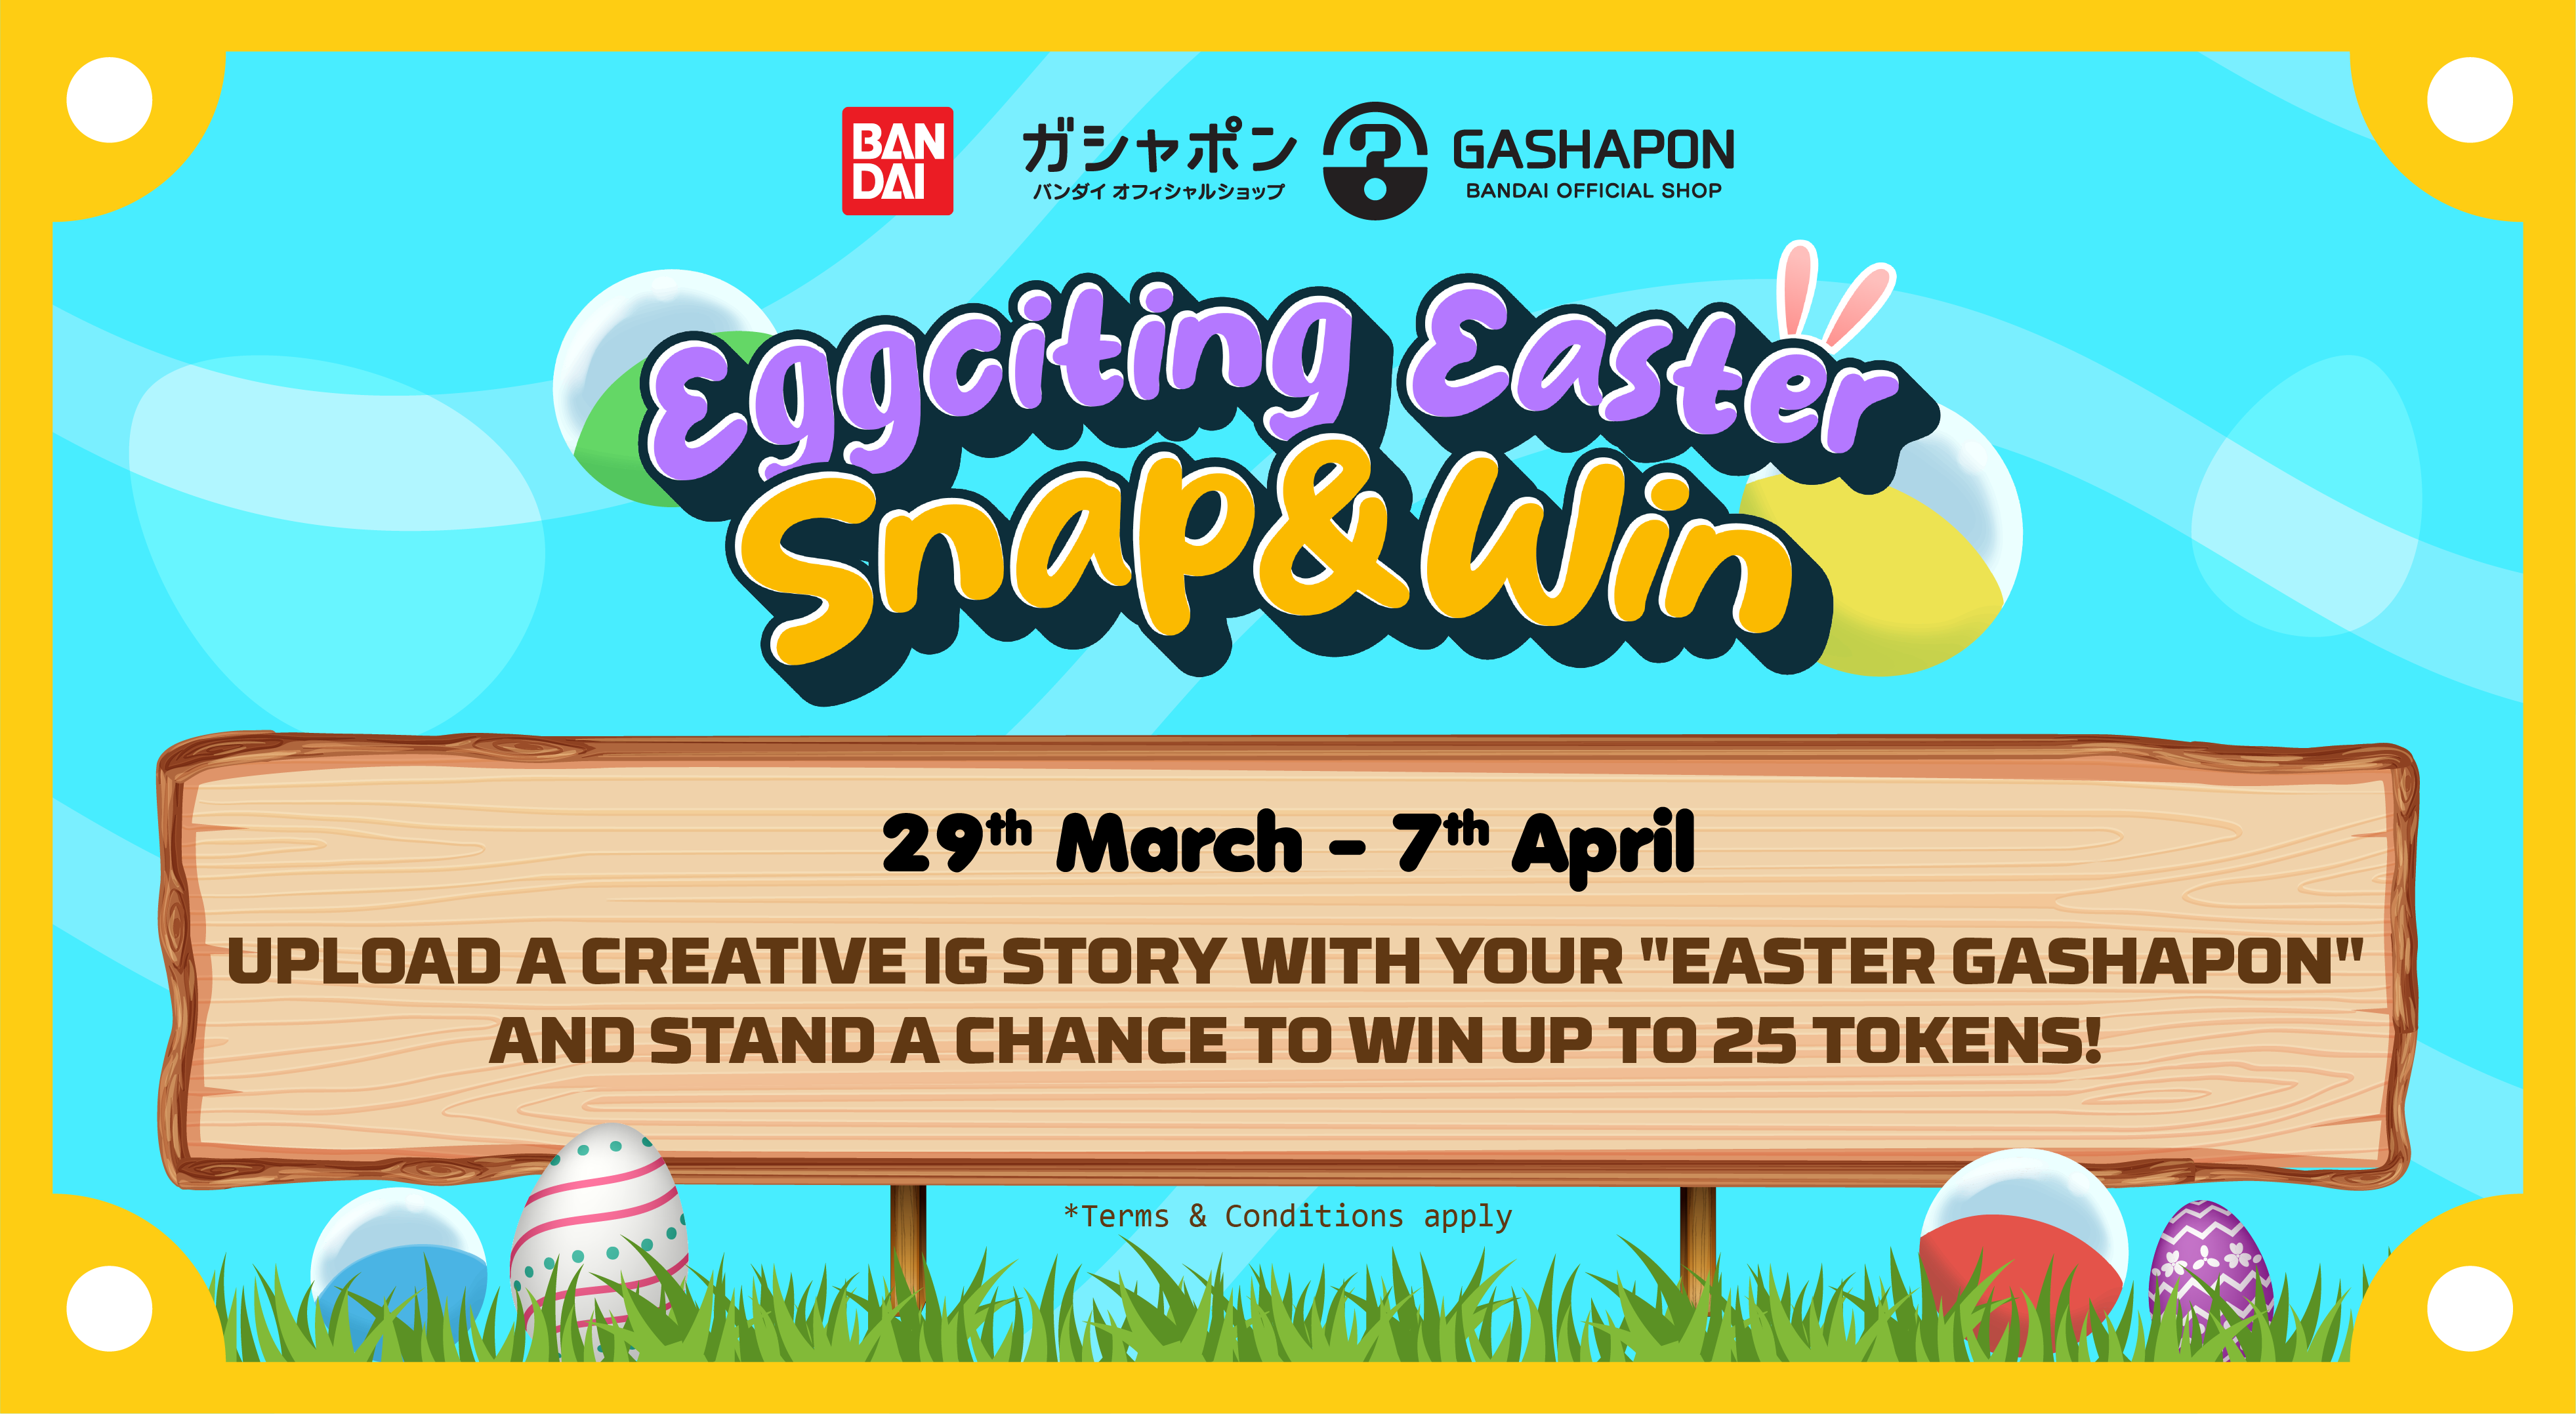 Eggciting Easter Snap and Win!